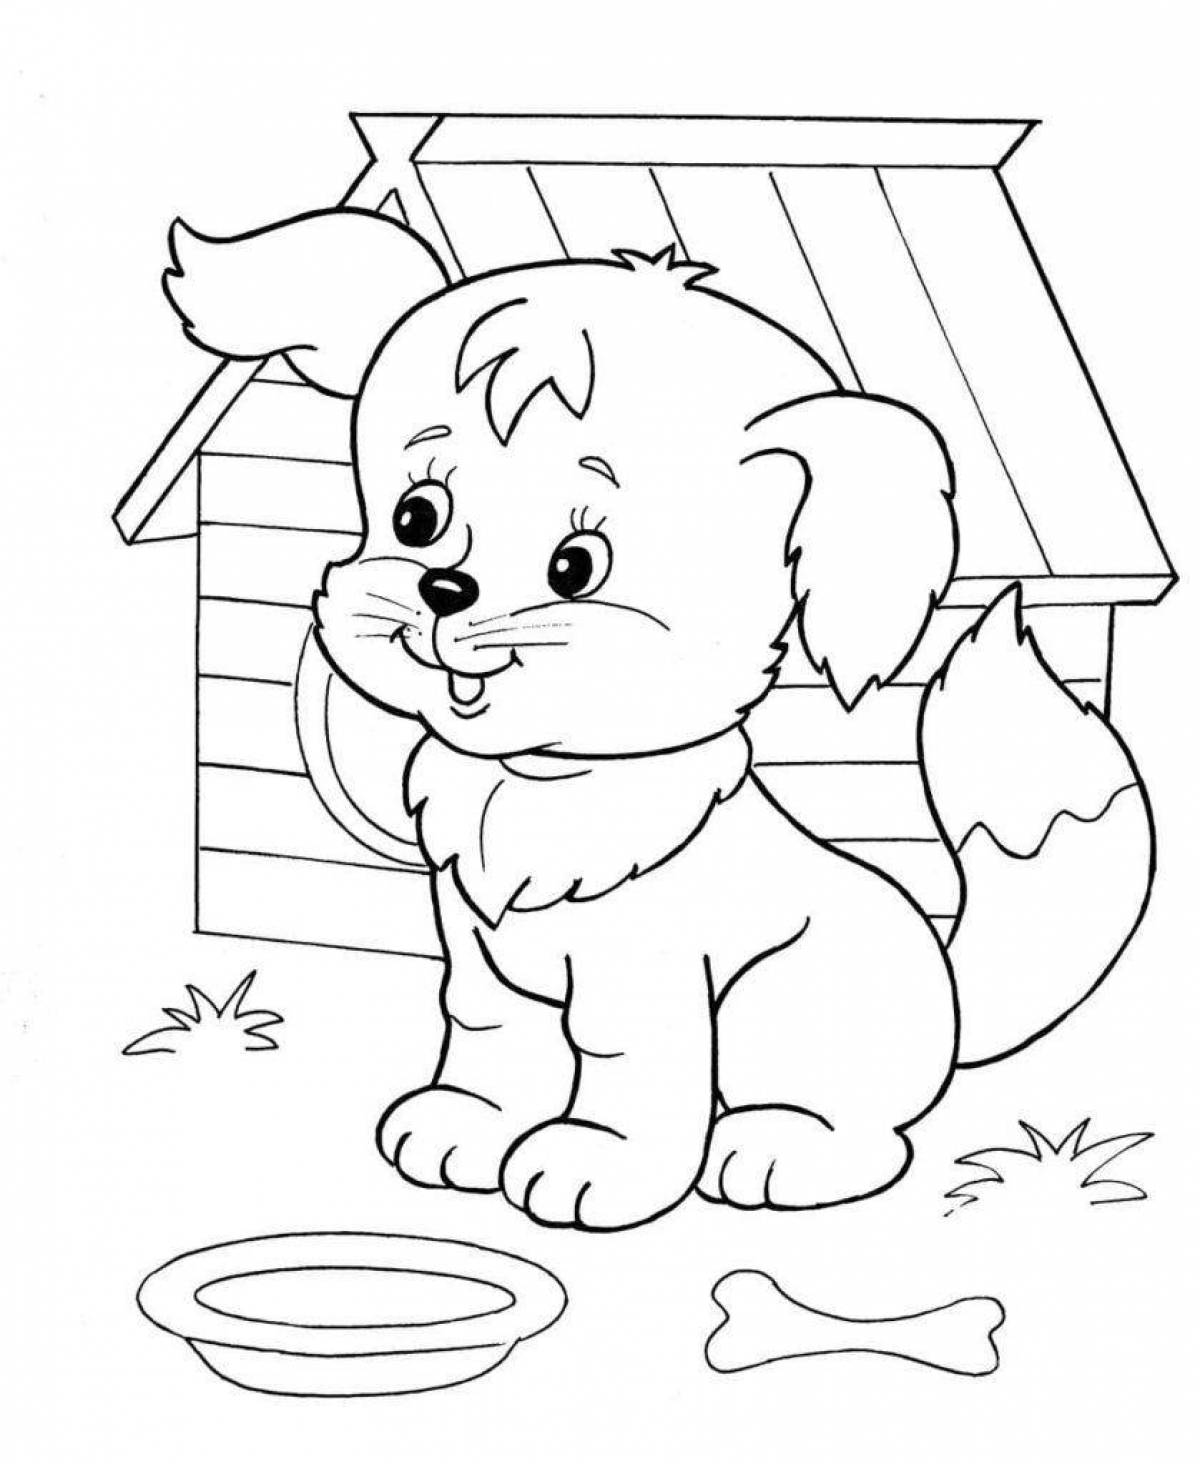 Curious coloring dog for children 3-4 years old